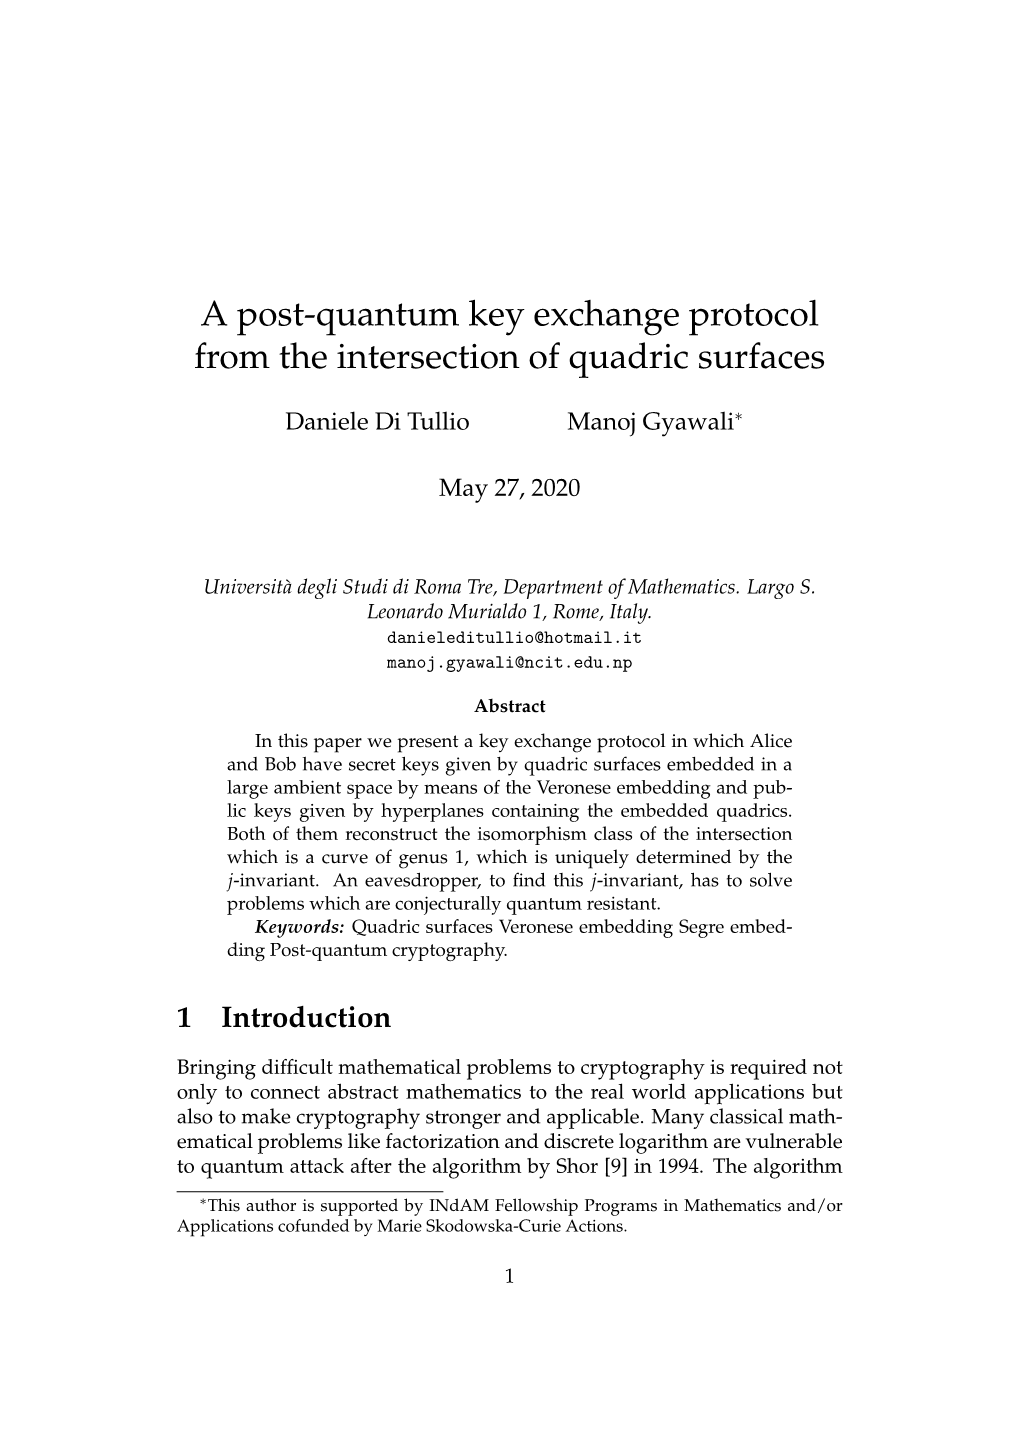 A Post-Quantum Key Exchange Protocol from the Intersection of Quadric Surfaces